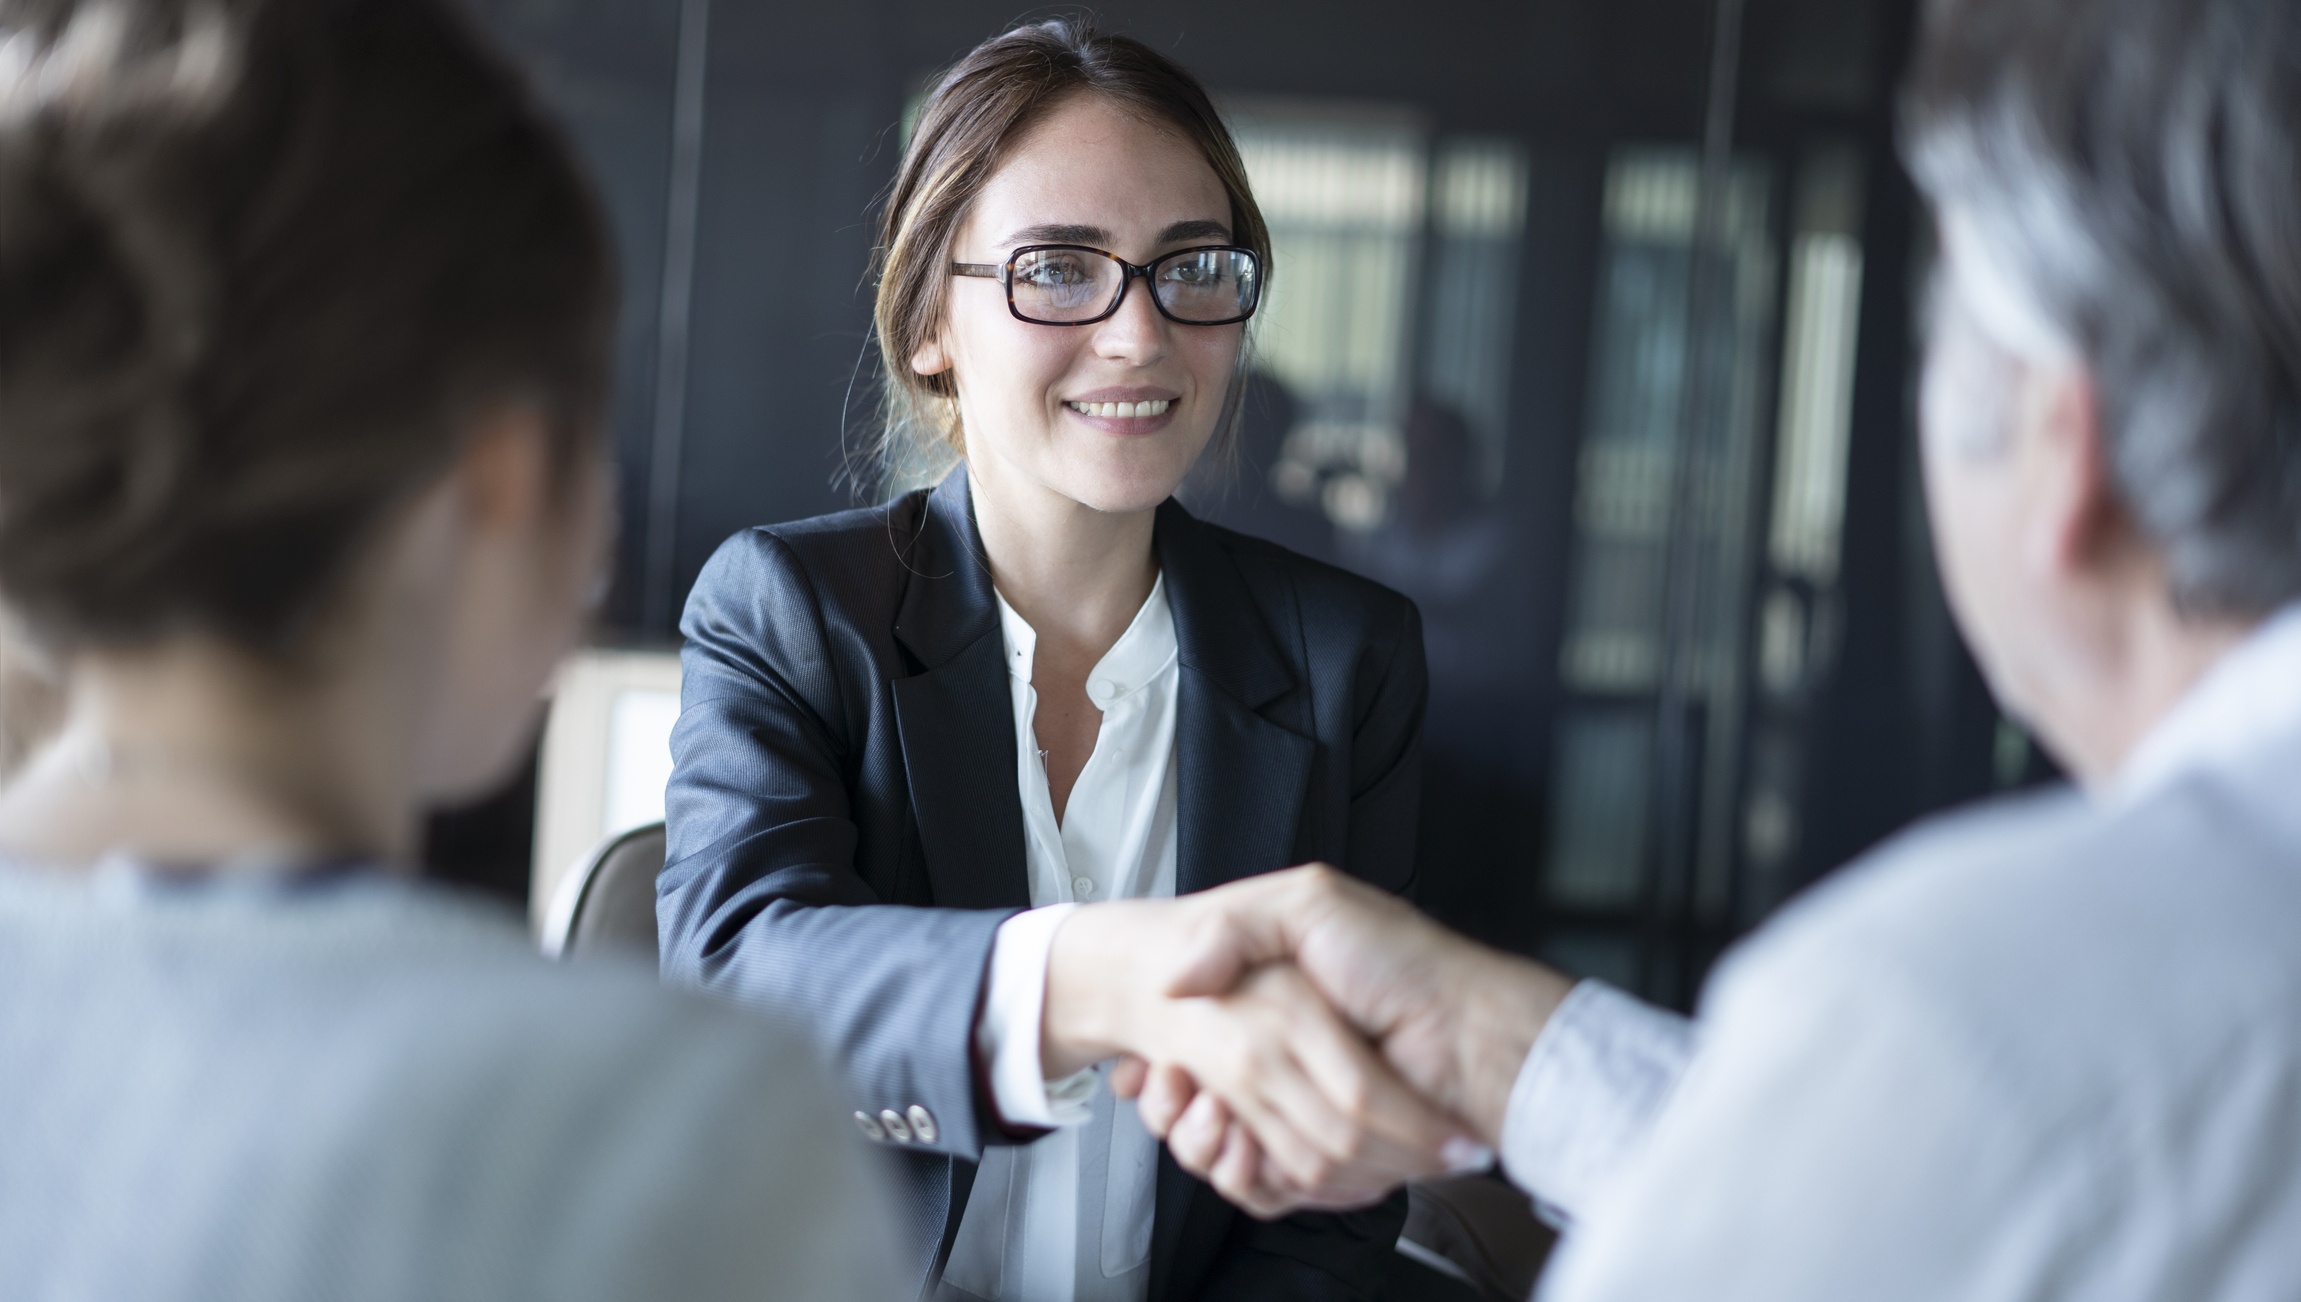 Stock Image of a Woman in A Business Suit and Glasses Smiling While Extending Her Arm and Shaking Hands with A Person Out Of View